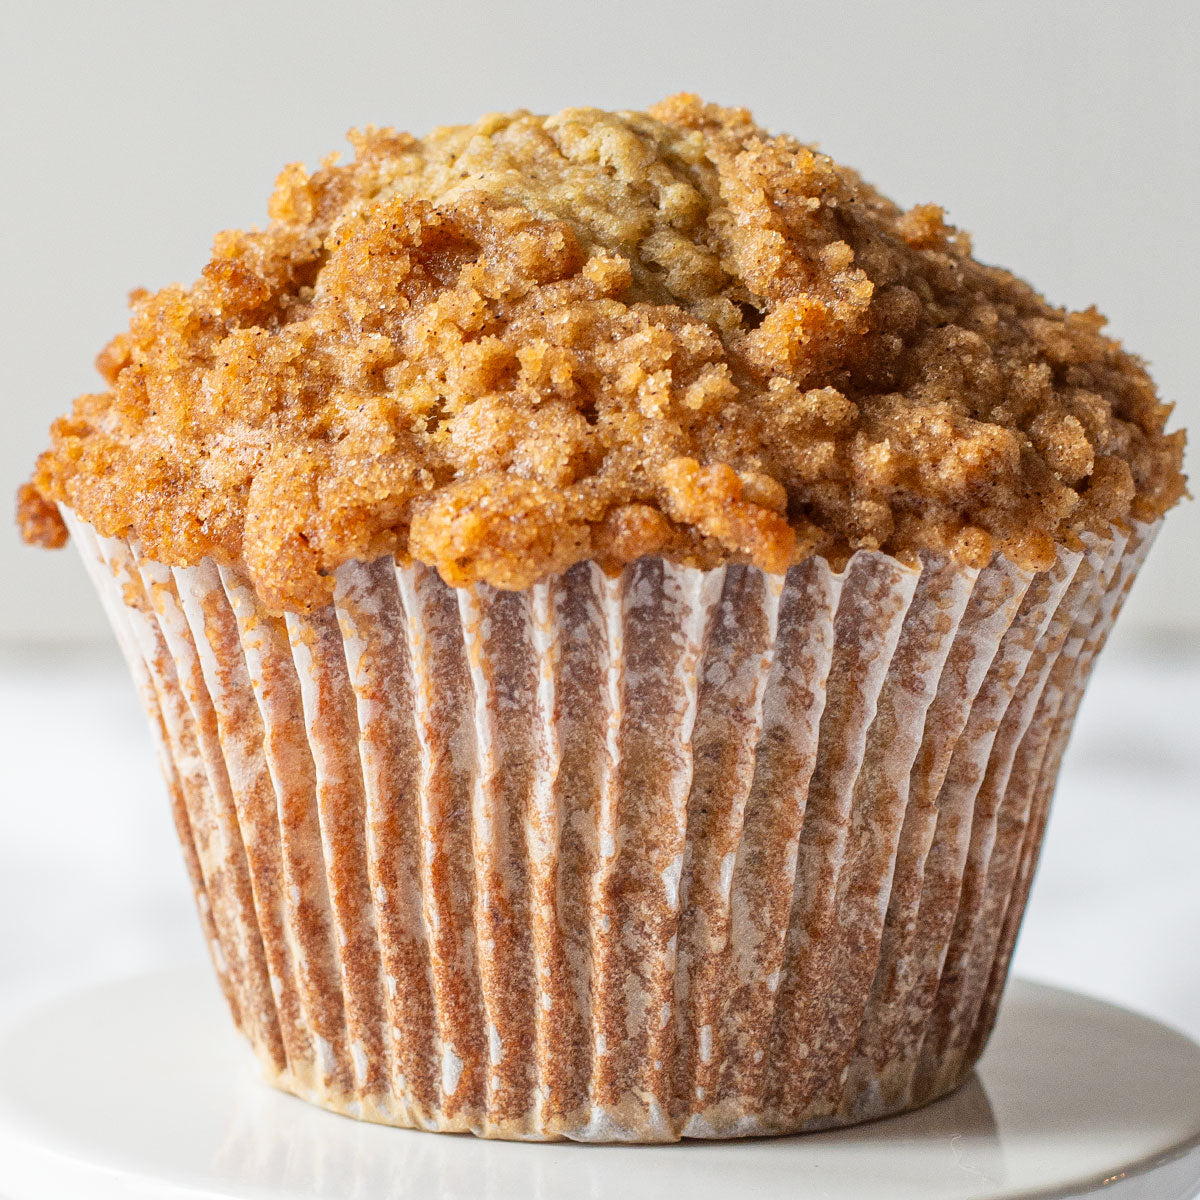 A scrumptious image of a Jumbo Banana Crumb Muffin, highlighting its moist banana-infused base and mouthwatering crumb topping made with brown sugar and cinnamon.